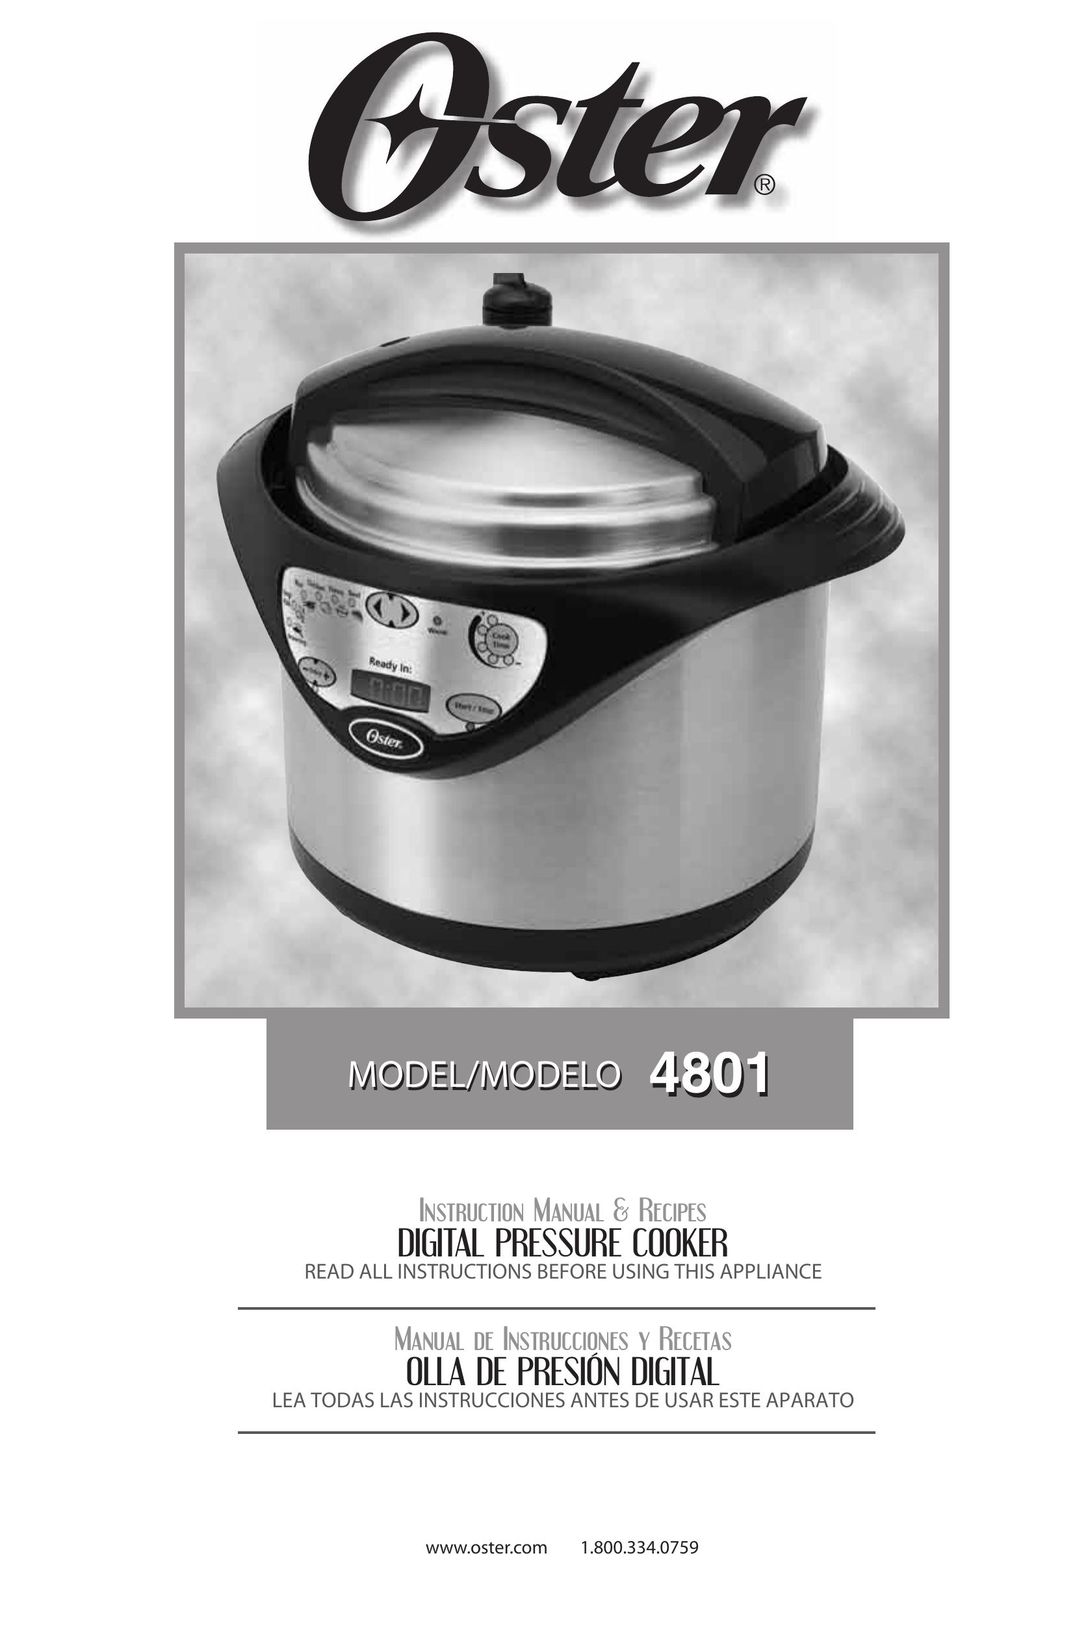 Oster 4801 Electric Pressure Cooker User Manual